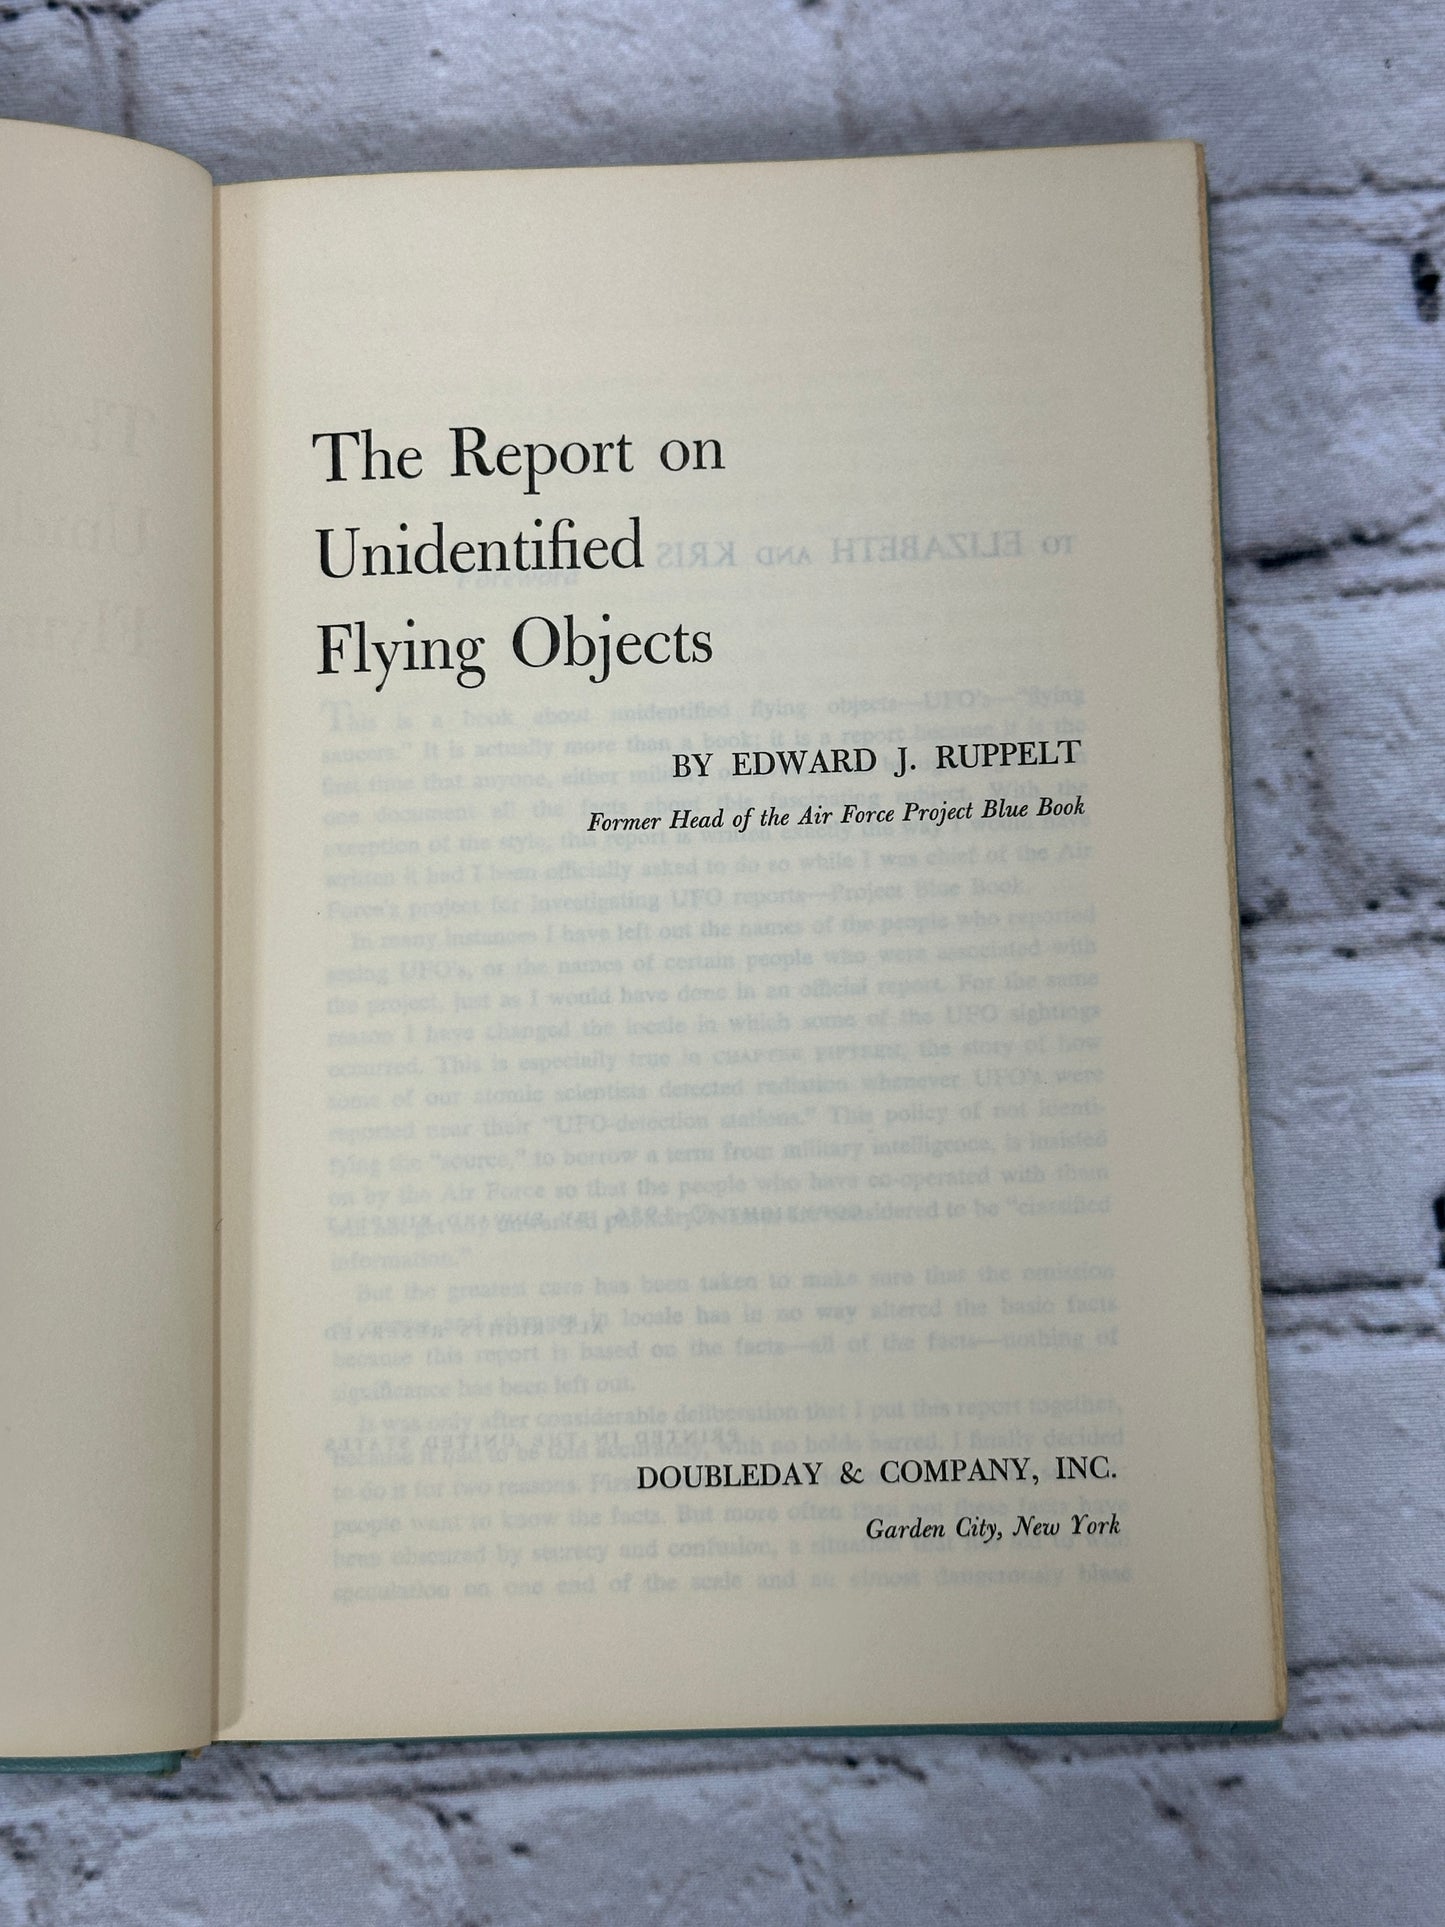 The Report on Unidentified Flying Objects By Edward J. Ruppelt [1956]